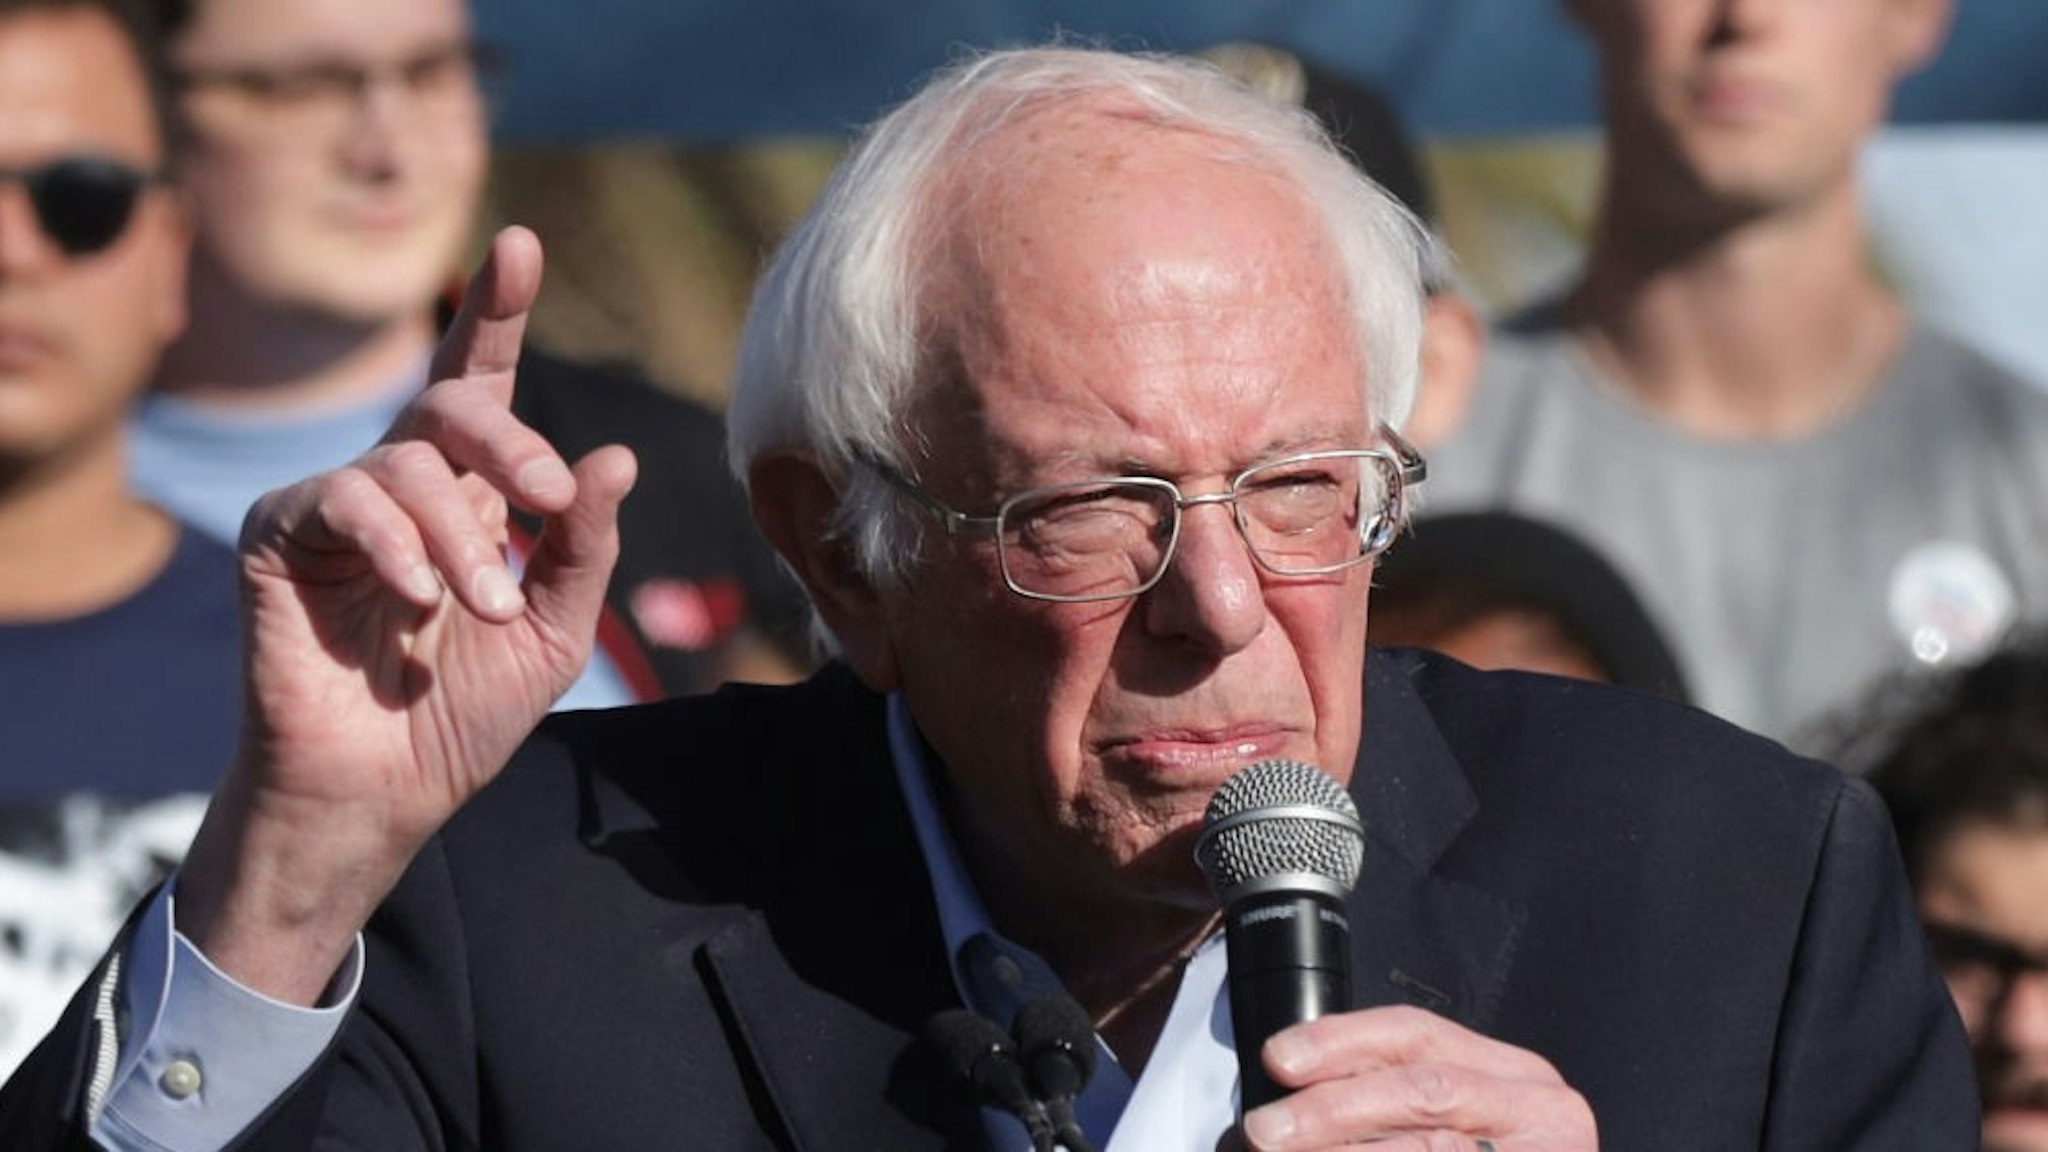 LAS VEGAS, NEVADA - FEBRUARY 18: Democratic presidential candidate Sen. Bernie Sanders (I-VT) speaks during a campaign rally at University of Nevada February 18, 2020 in Las Vegas, Nevada. Sen. Sanders continues to campaign ahead of the upcoming Nevada Democratic presidential caucus on February 22. (Photo by